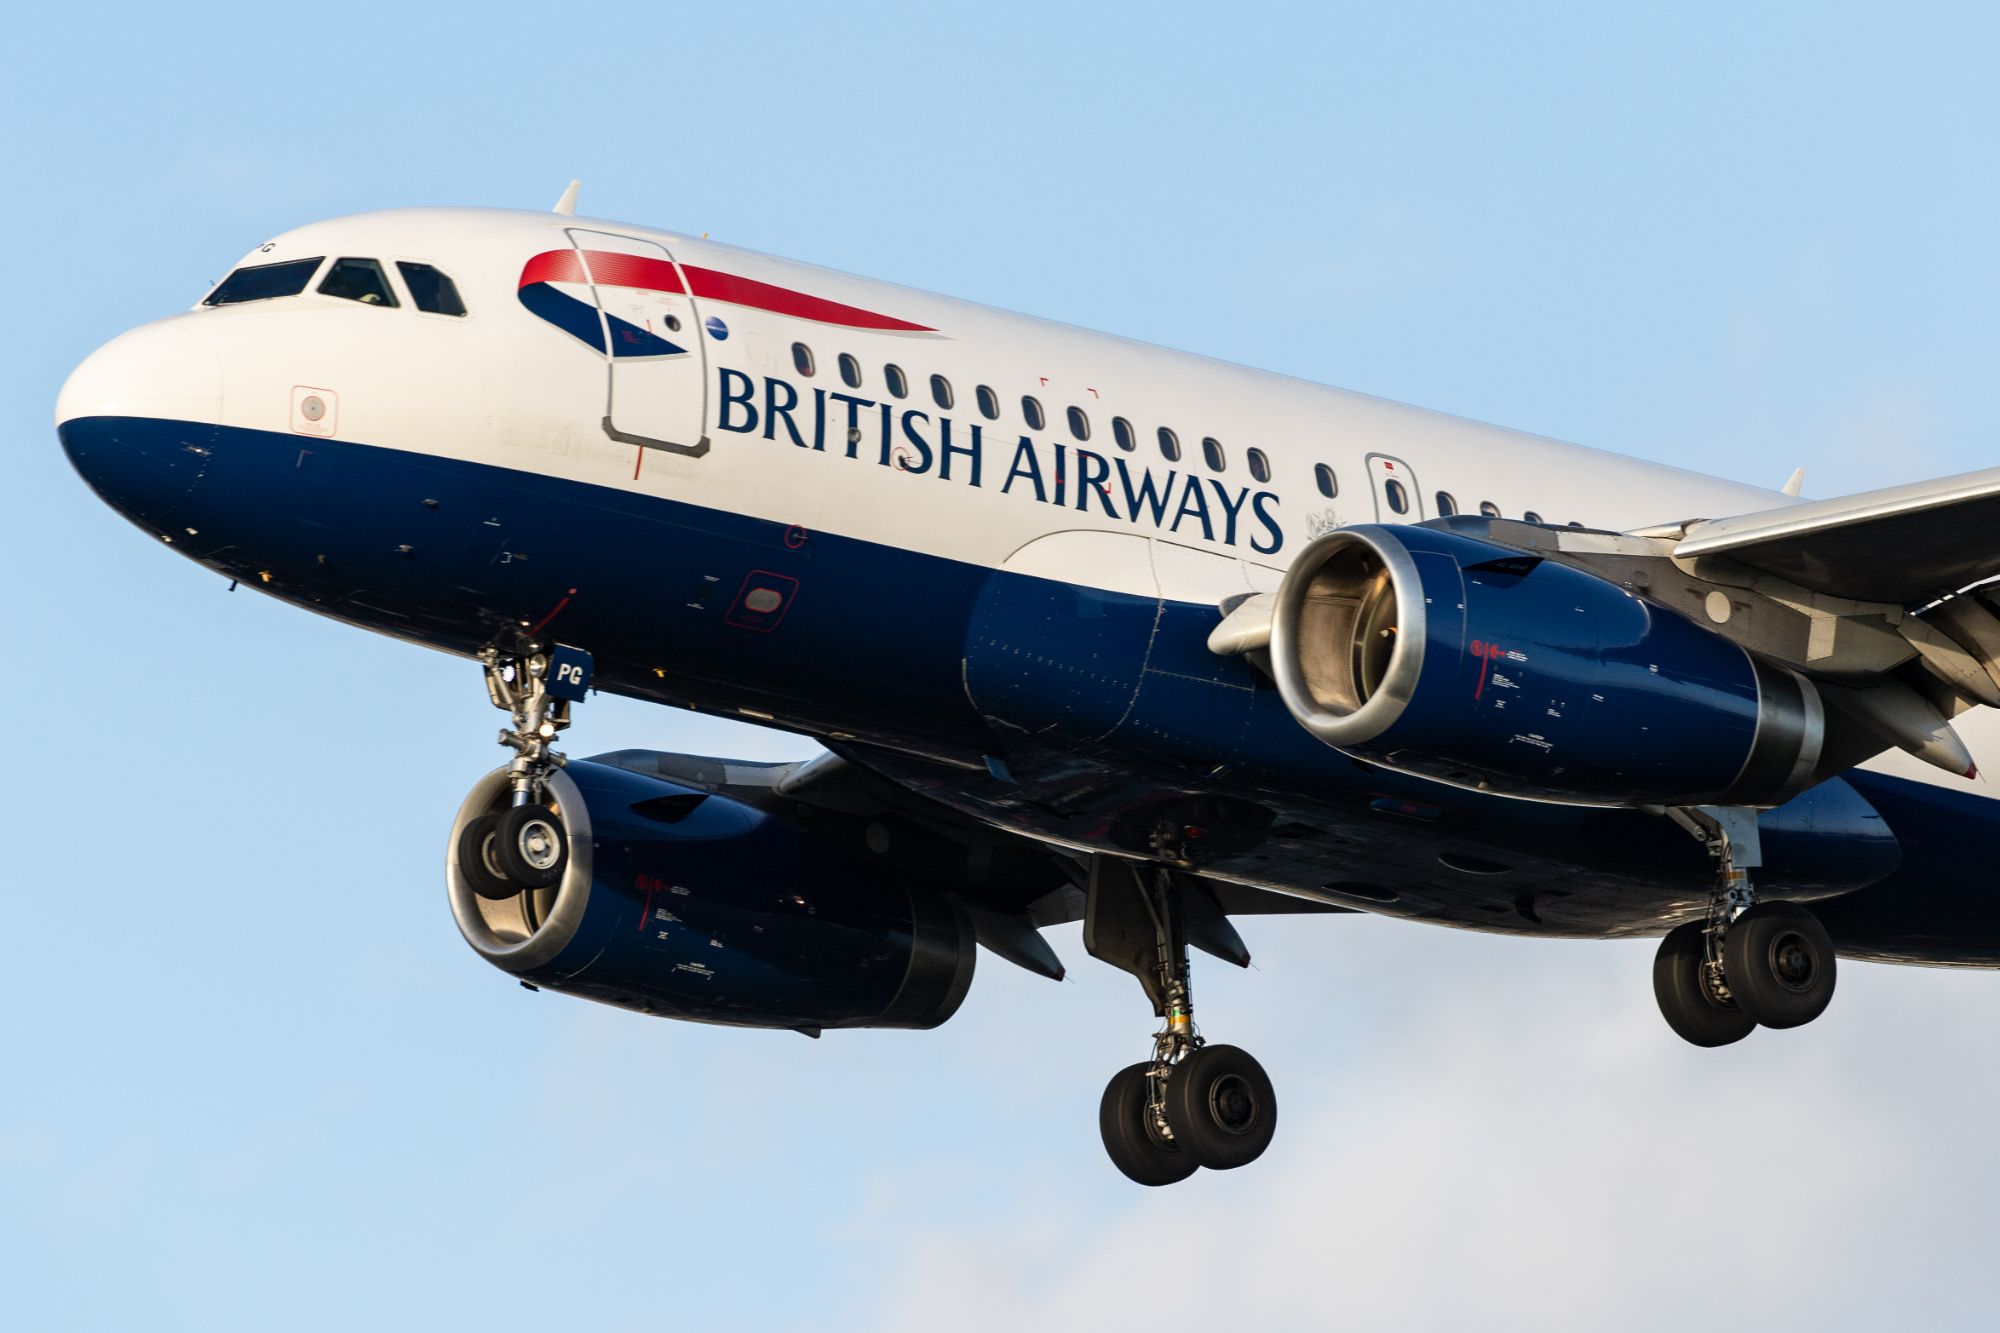 BA flight aborts take-off on runway after plane receives chilling bomb threat